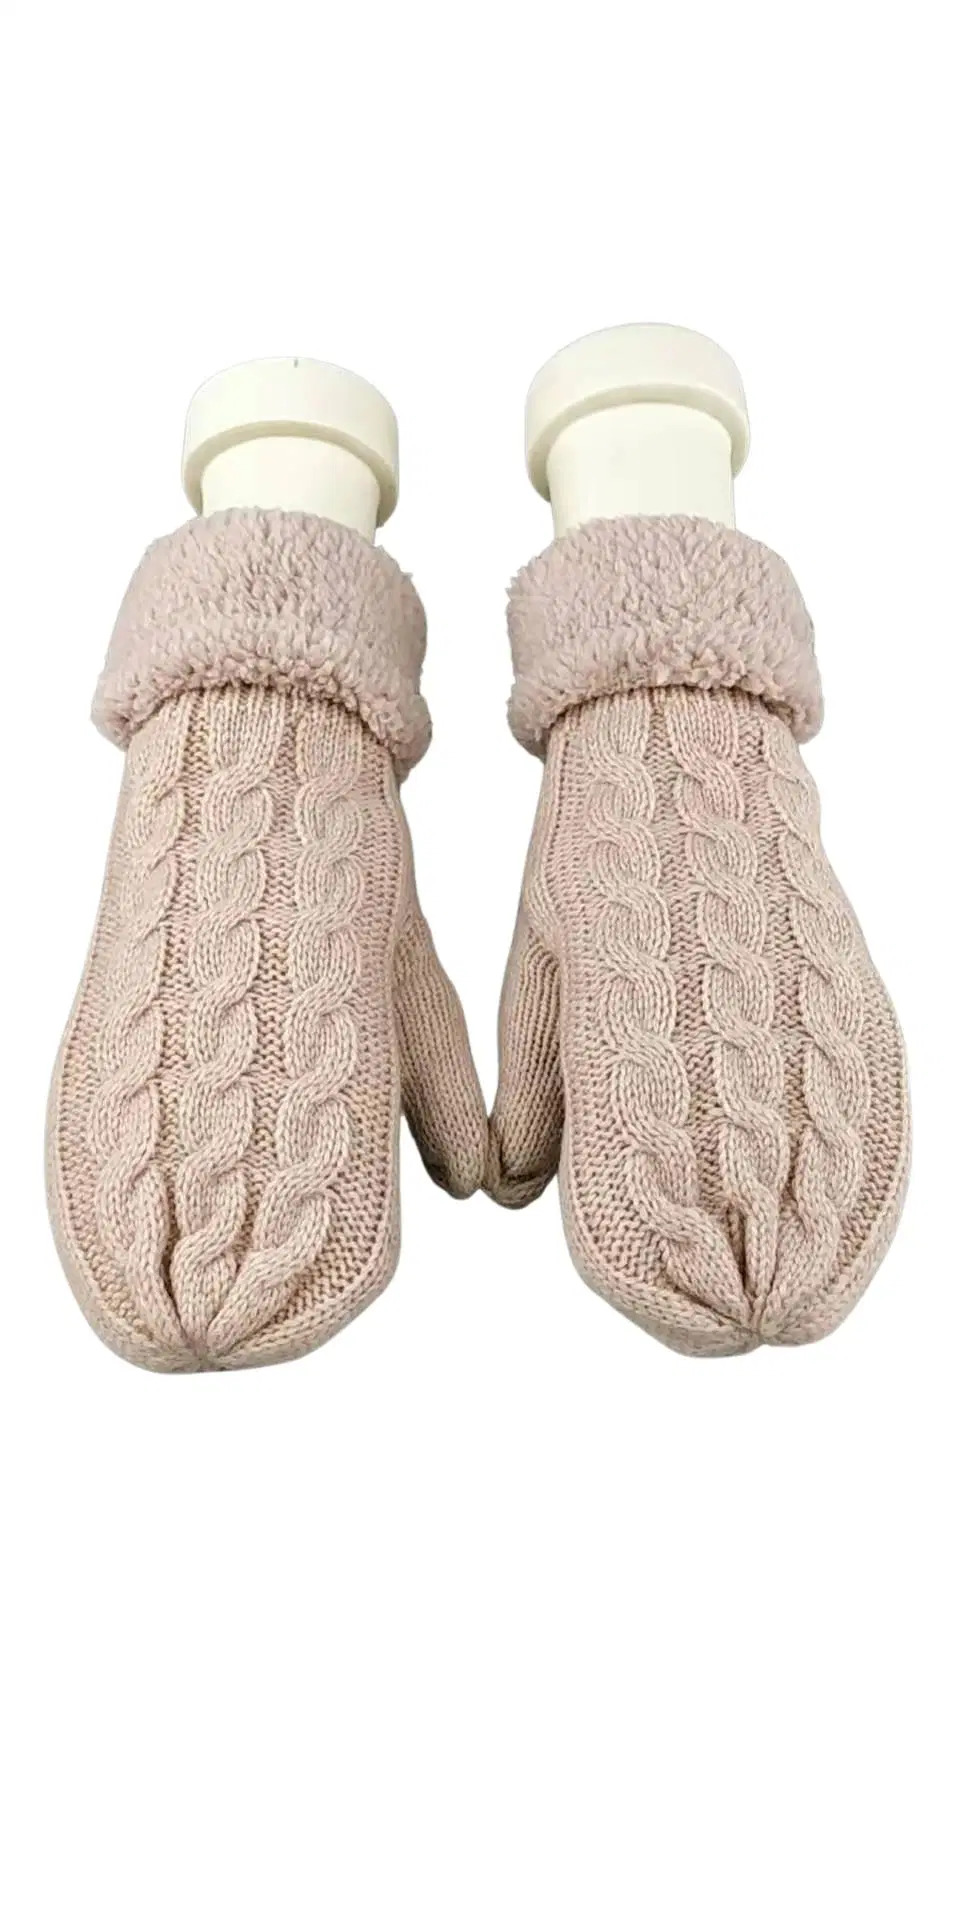 Chunky Knit Gloves Warm Mittens with Fleece Lining 162215gl